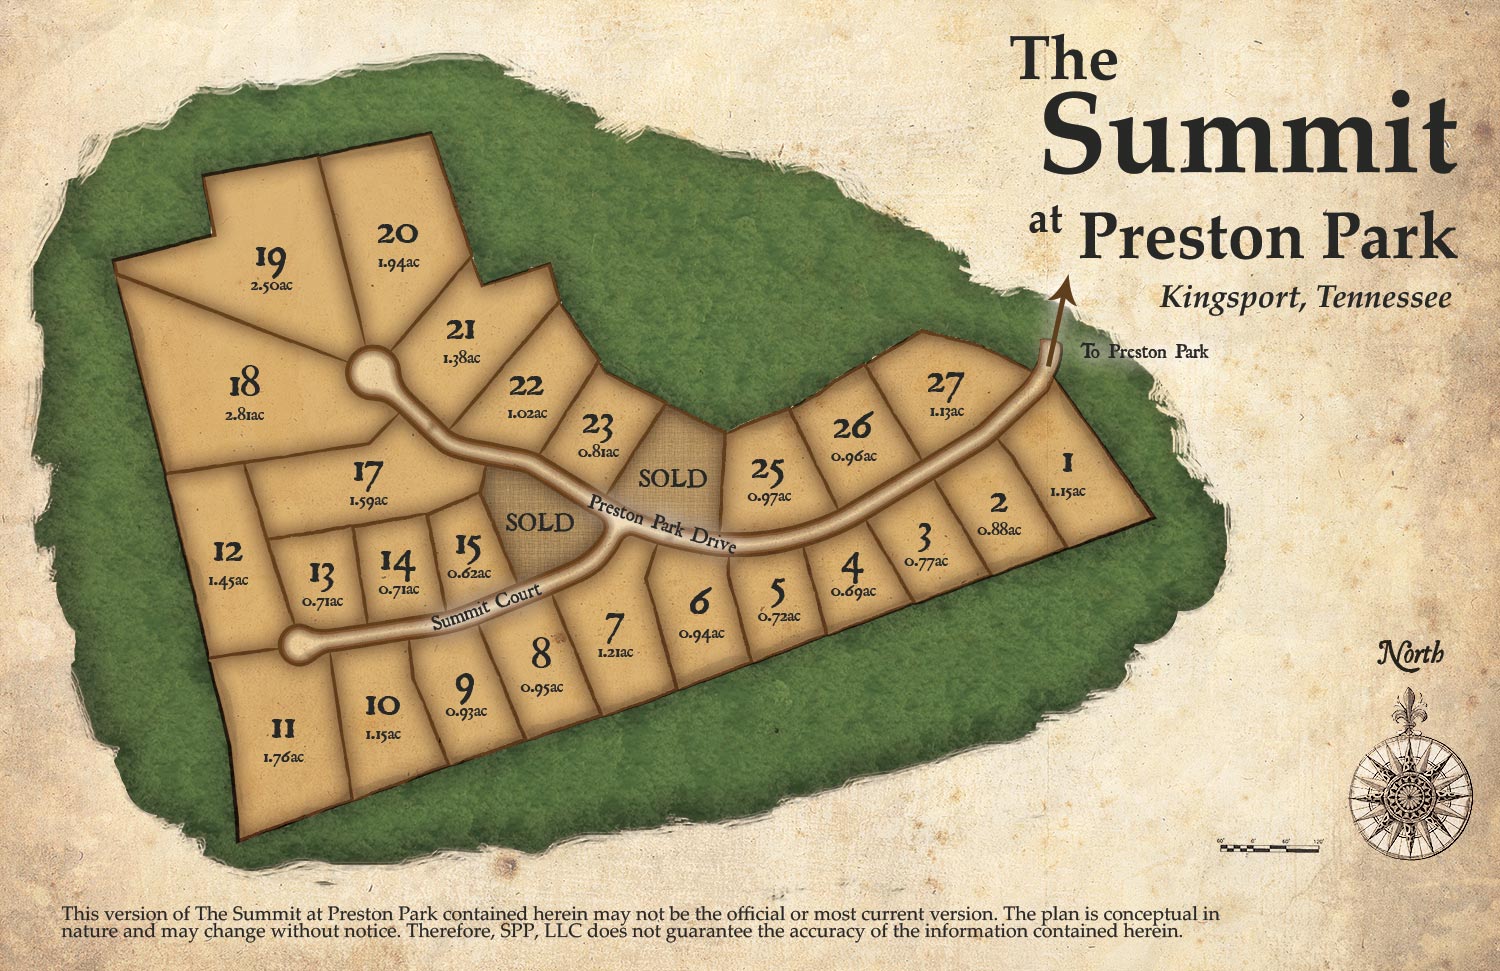 Available plots of land for luxury homes at The Summit at Preston Park in Kingsport, Tennessee